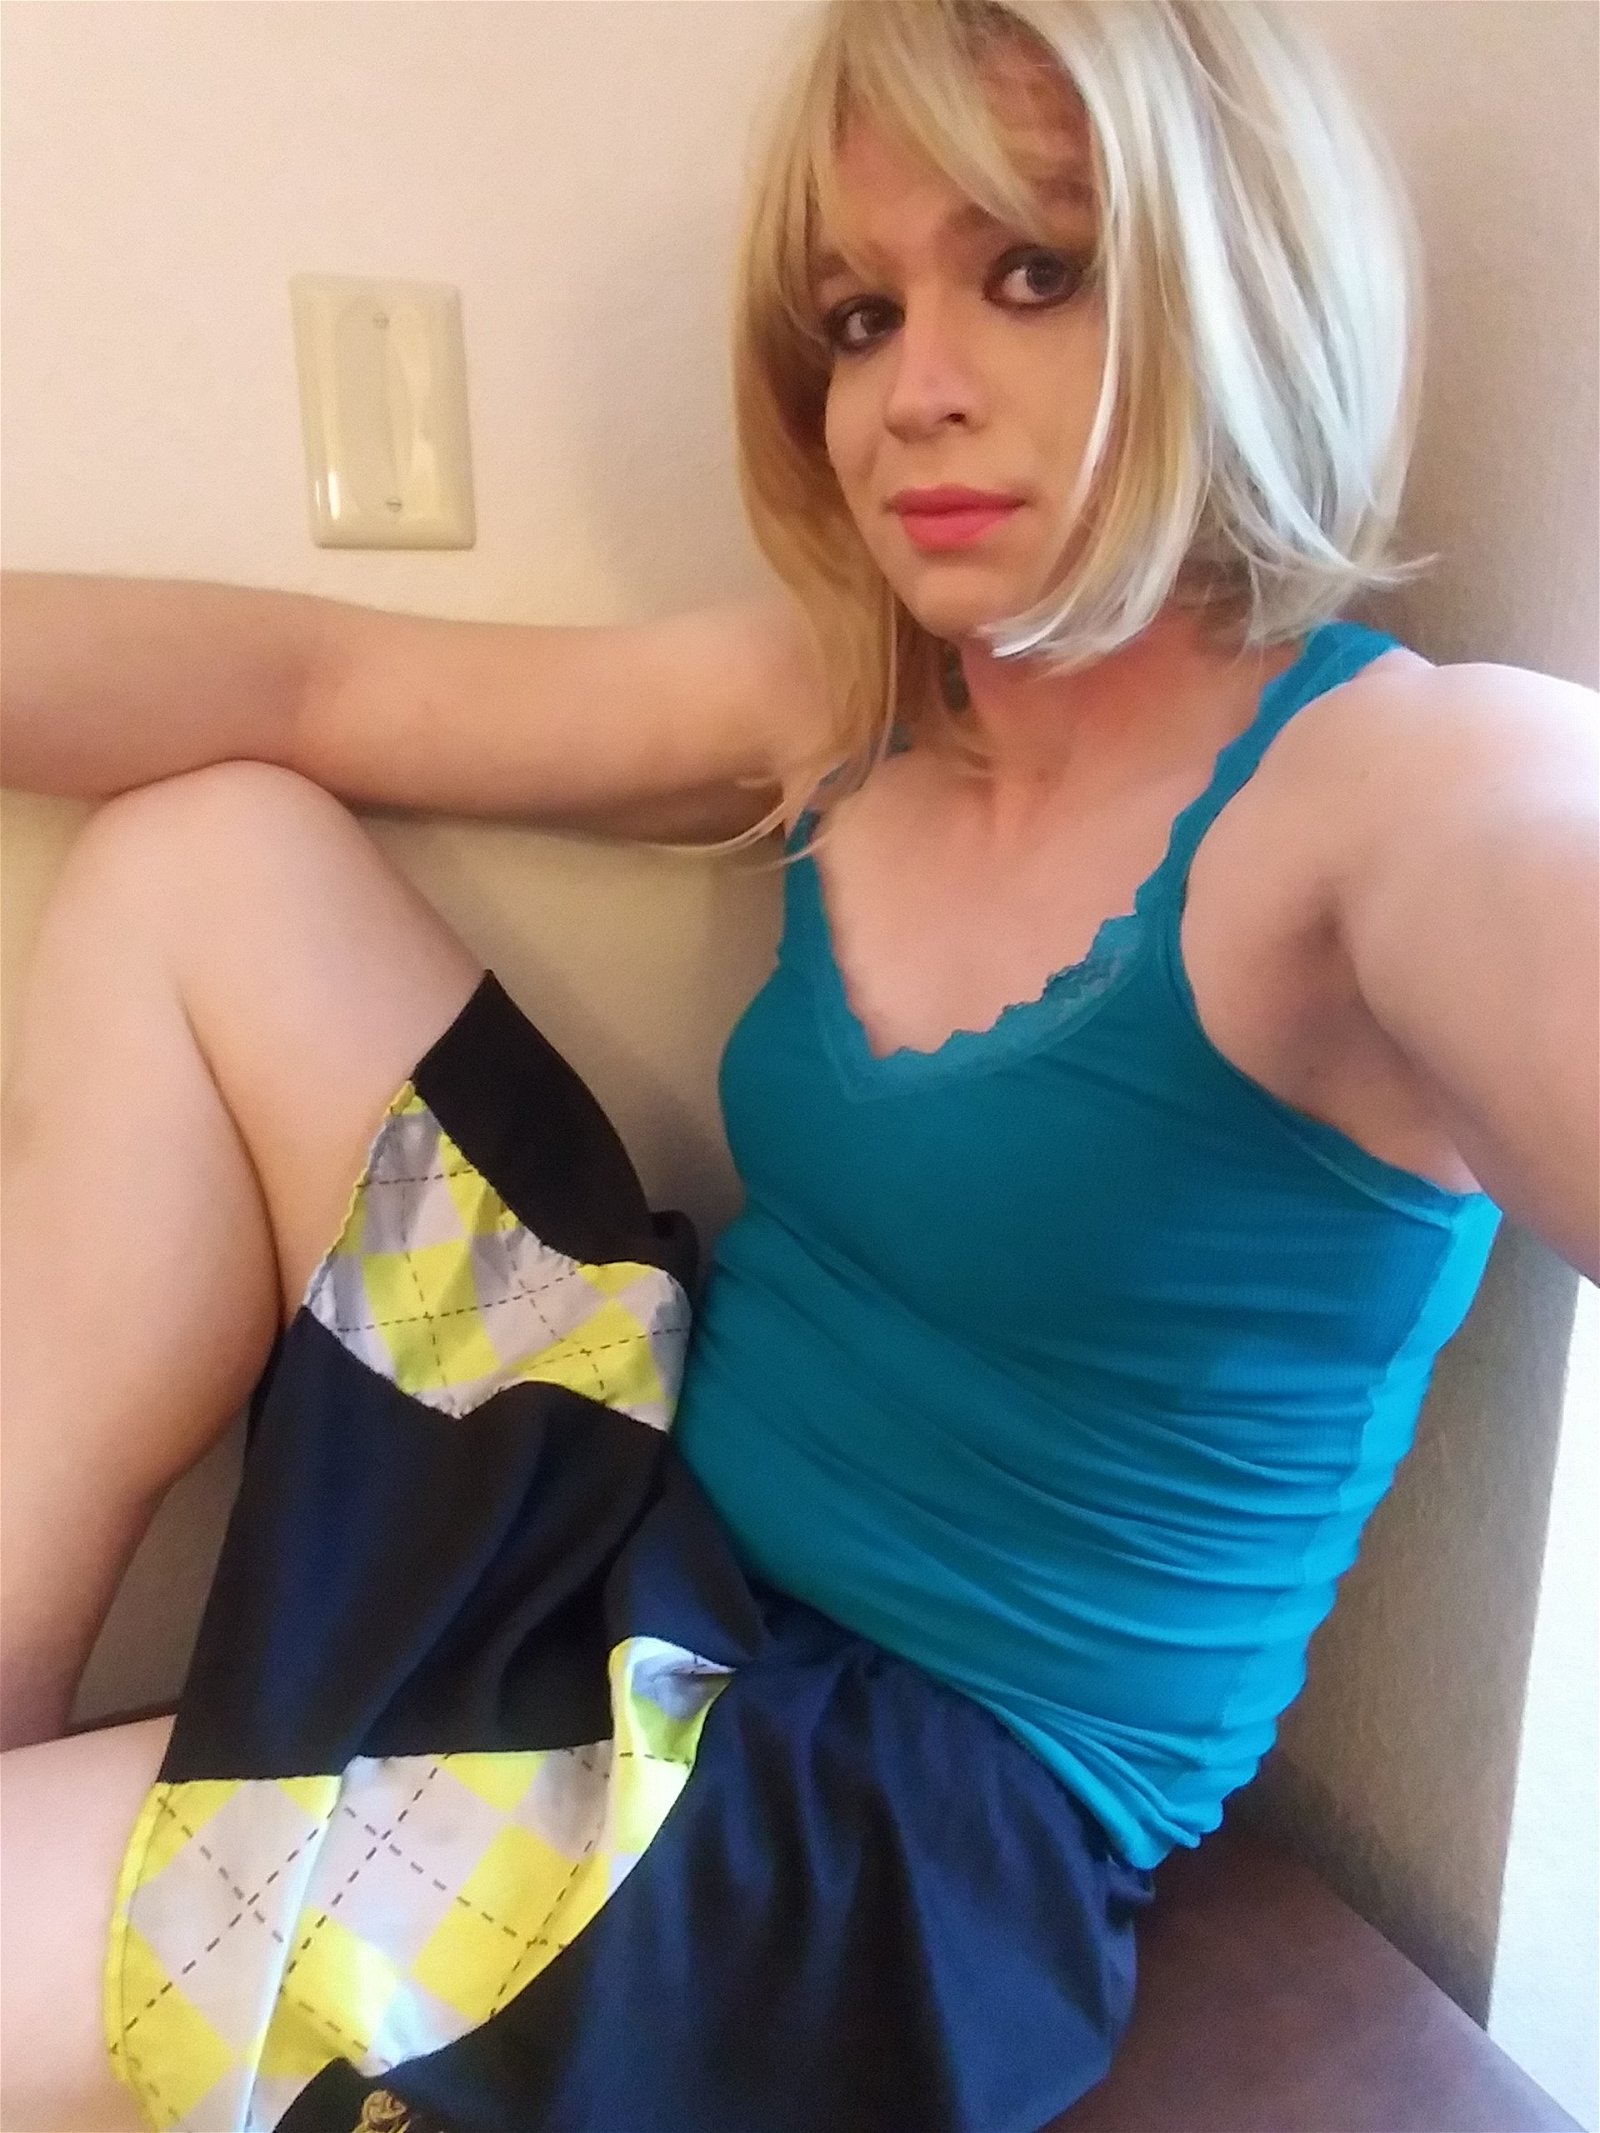 Photo by Va4lovers with the username @Va4lovers, who is a verified user,  October 25, 2020 at 3:23 AM. The post is about the topic Sissy and the text says 'If only someone was around to give me some sissy pleasure on a Saturday night... I could use a nice touch up my skirt right now'